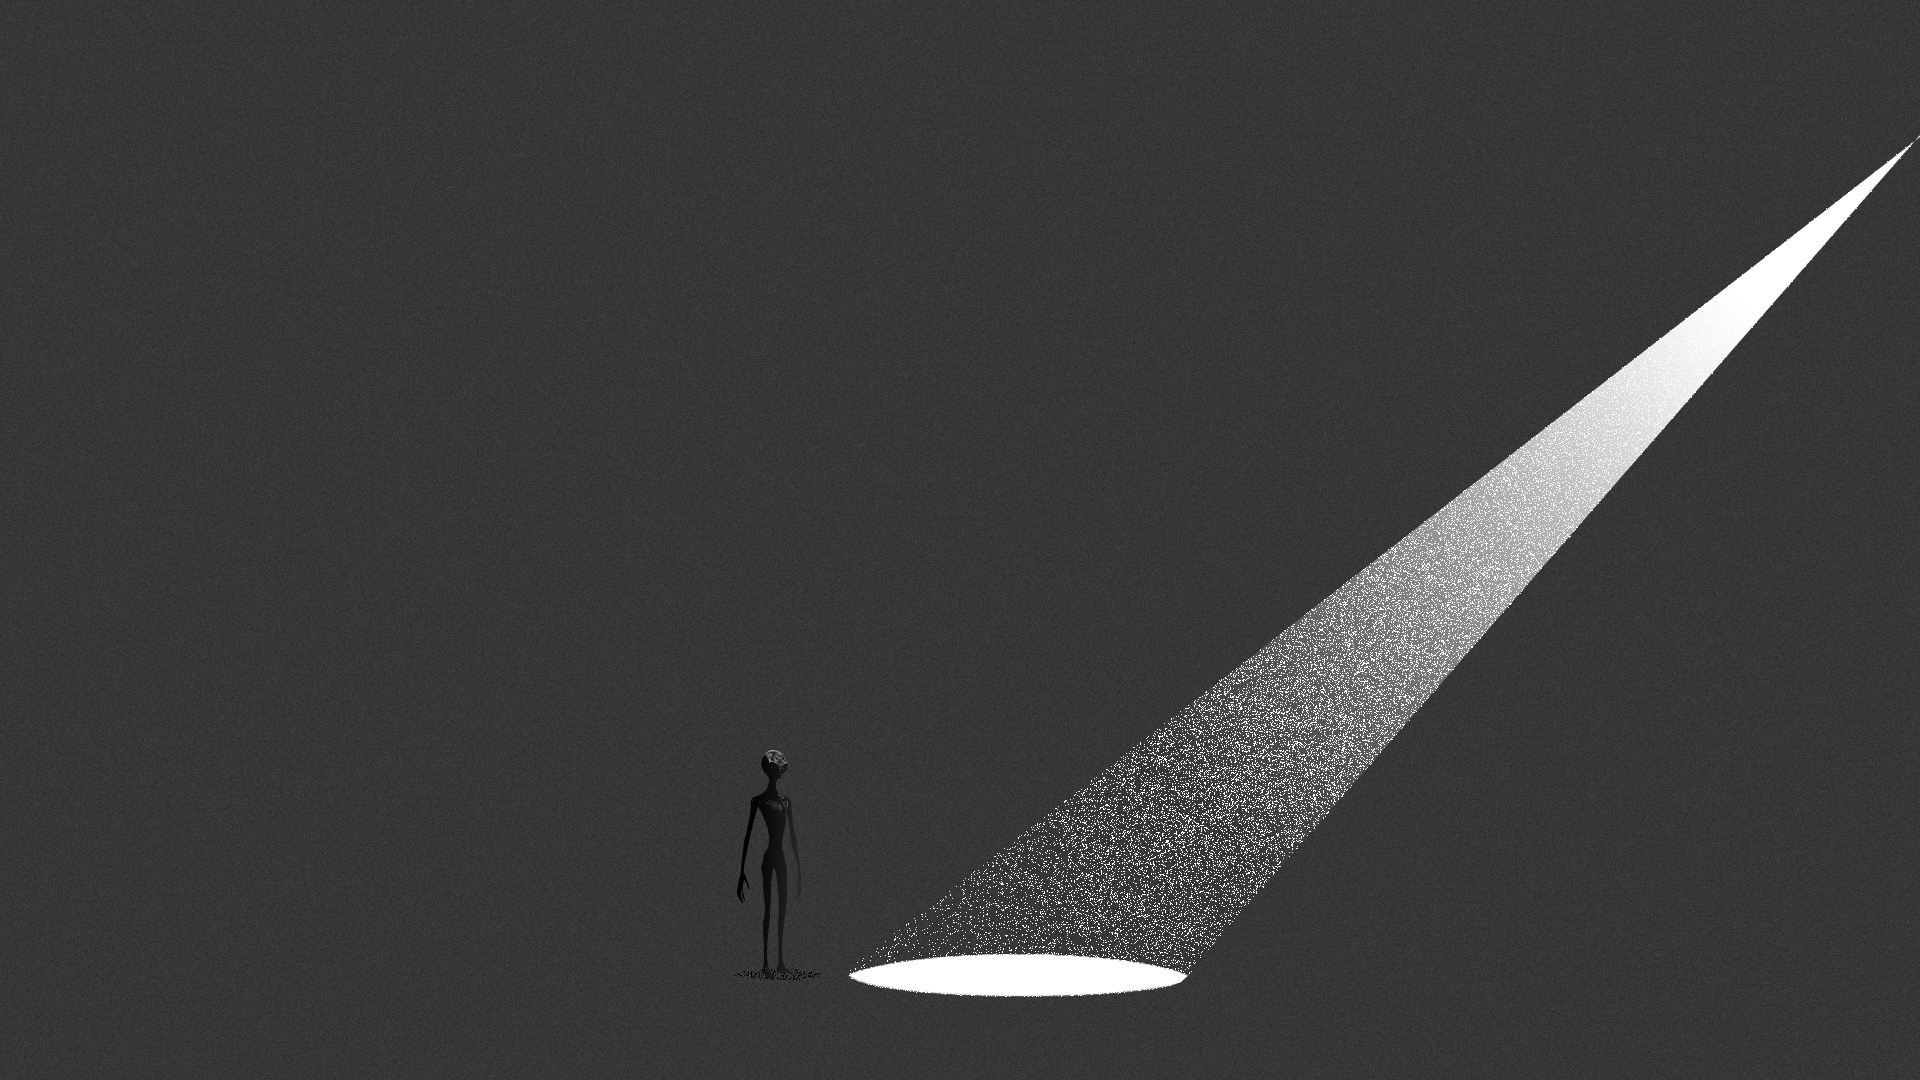 An illustration of a floodlight light shining next to a person.